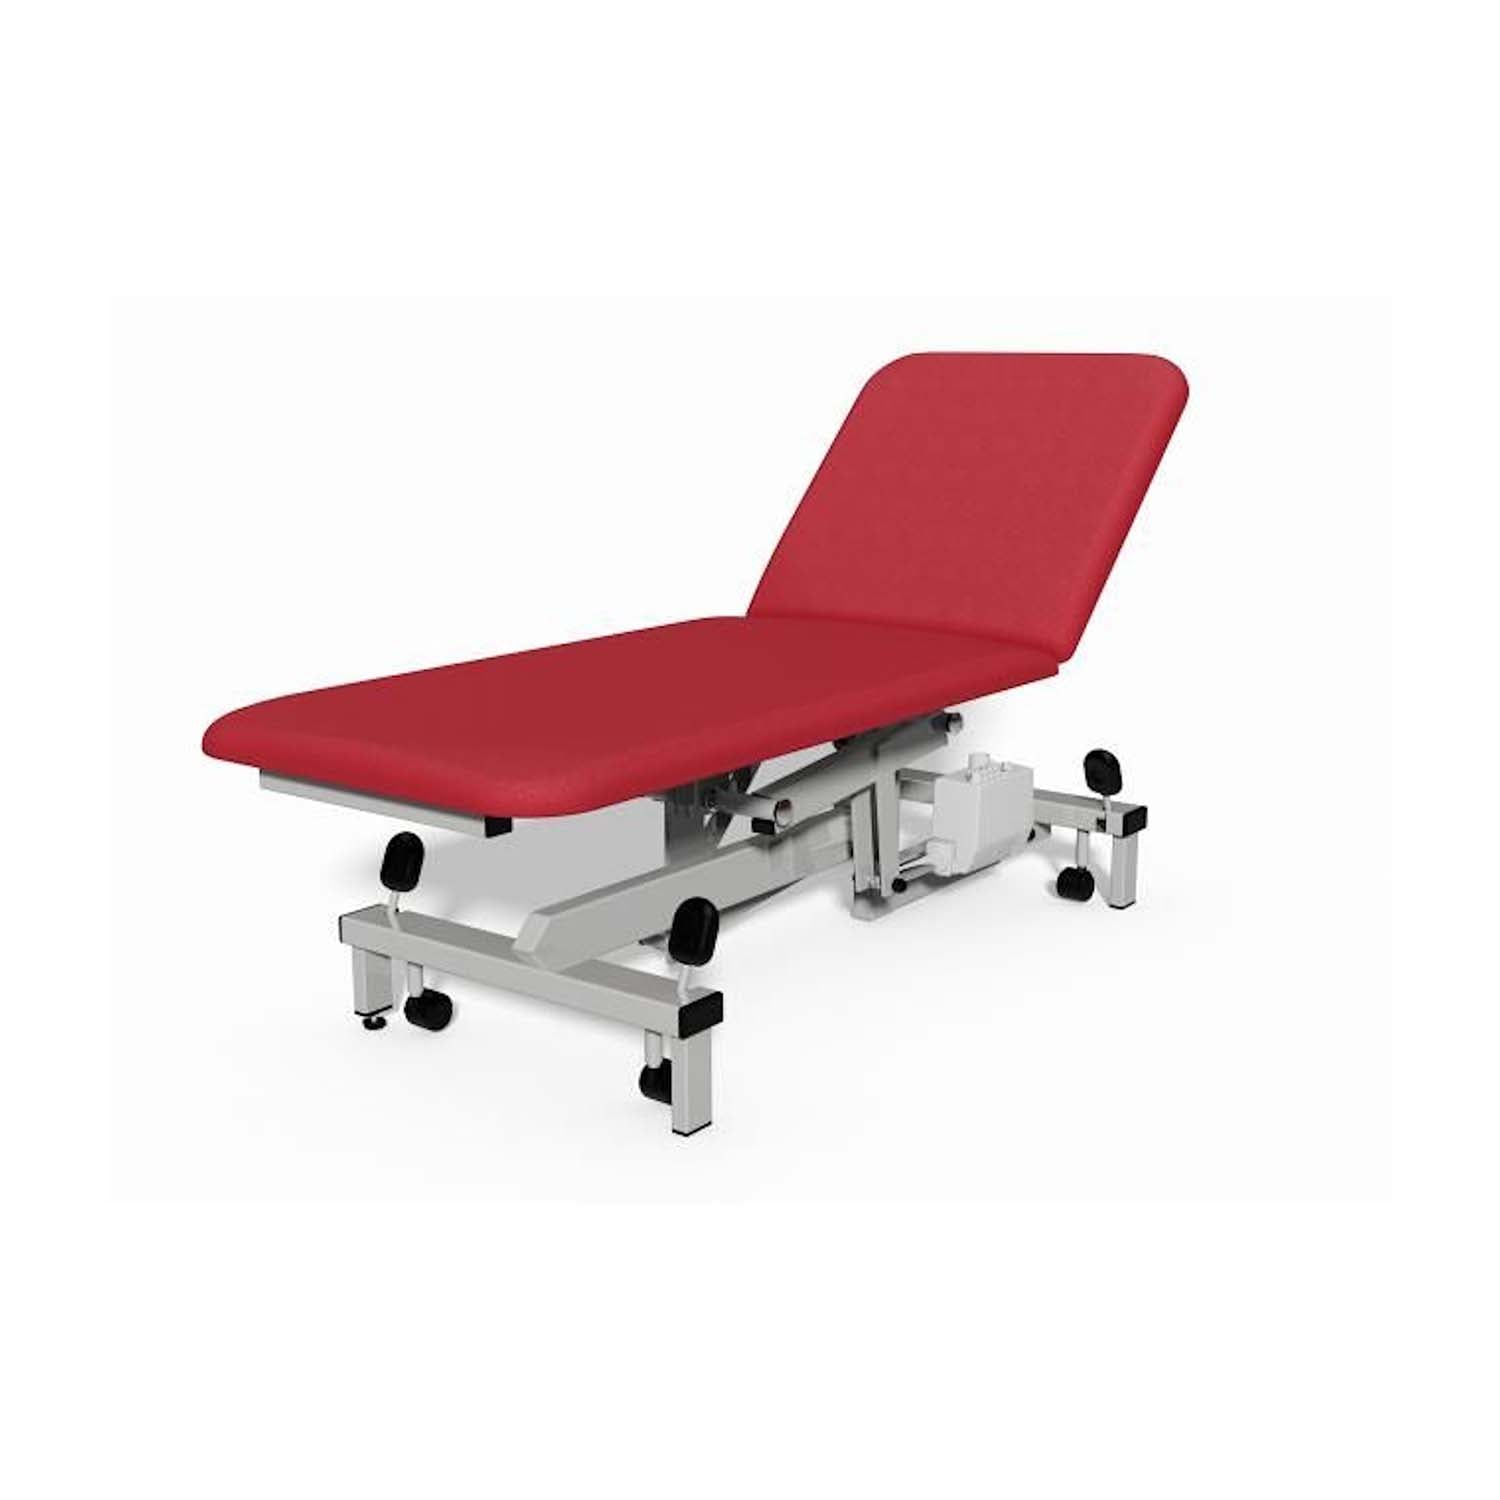 Plinth 2000 Model 502 Examination Couch | Electric | Pillarbox